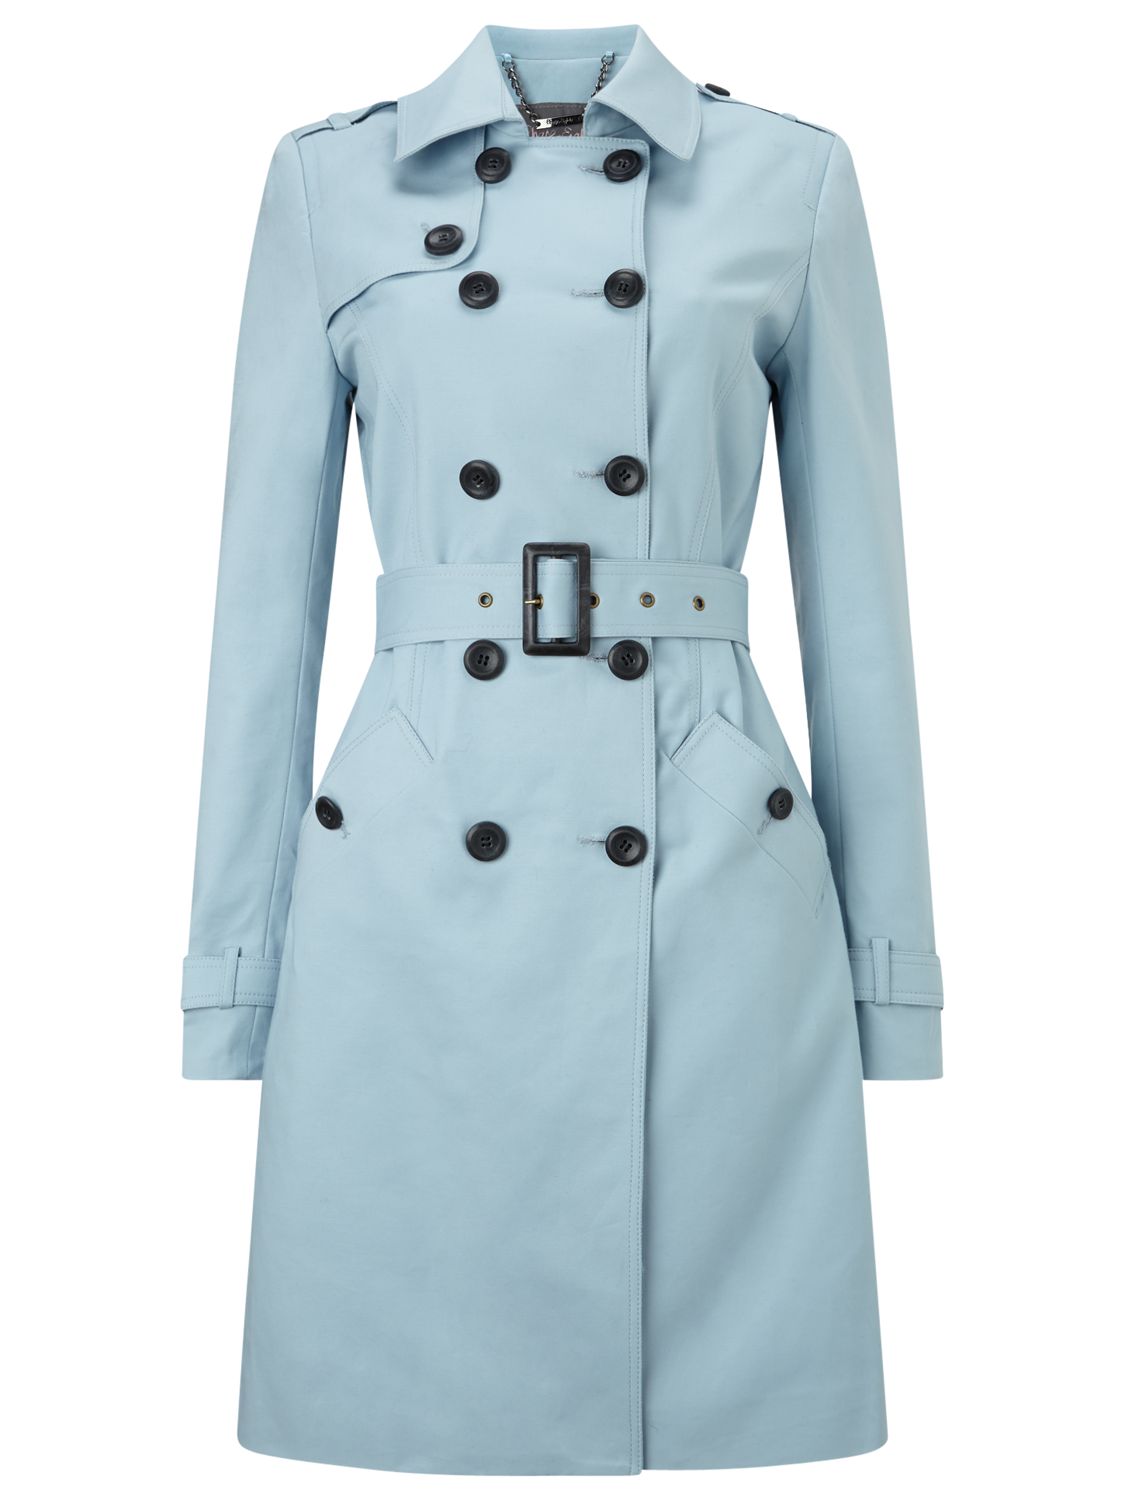 Phase Eight Tabatha Trench Coat, Baby Blue at John Lewis & Partners